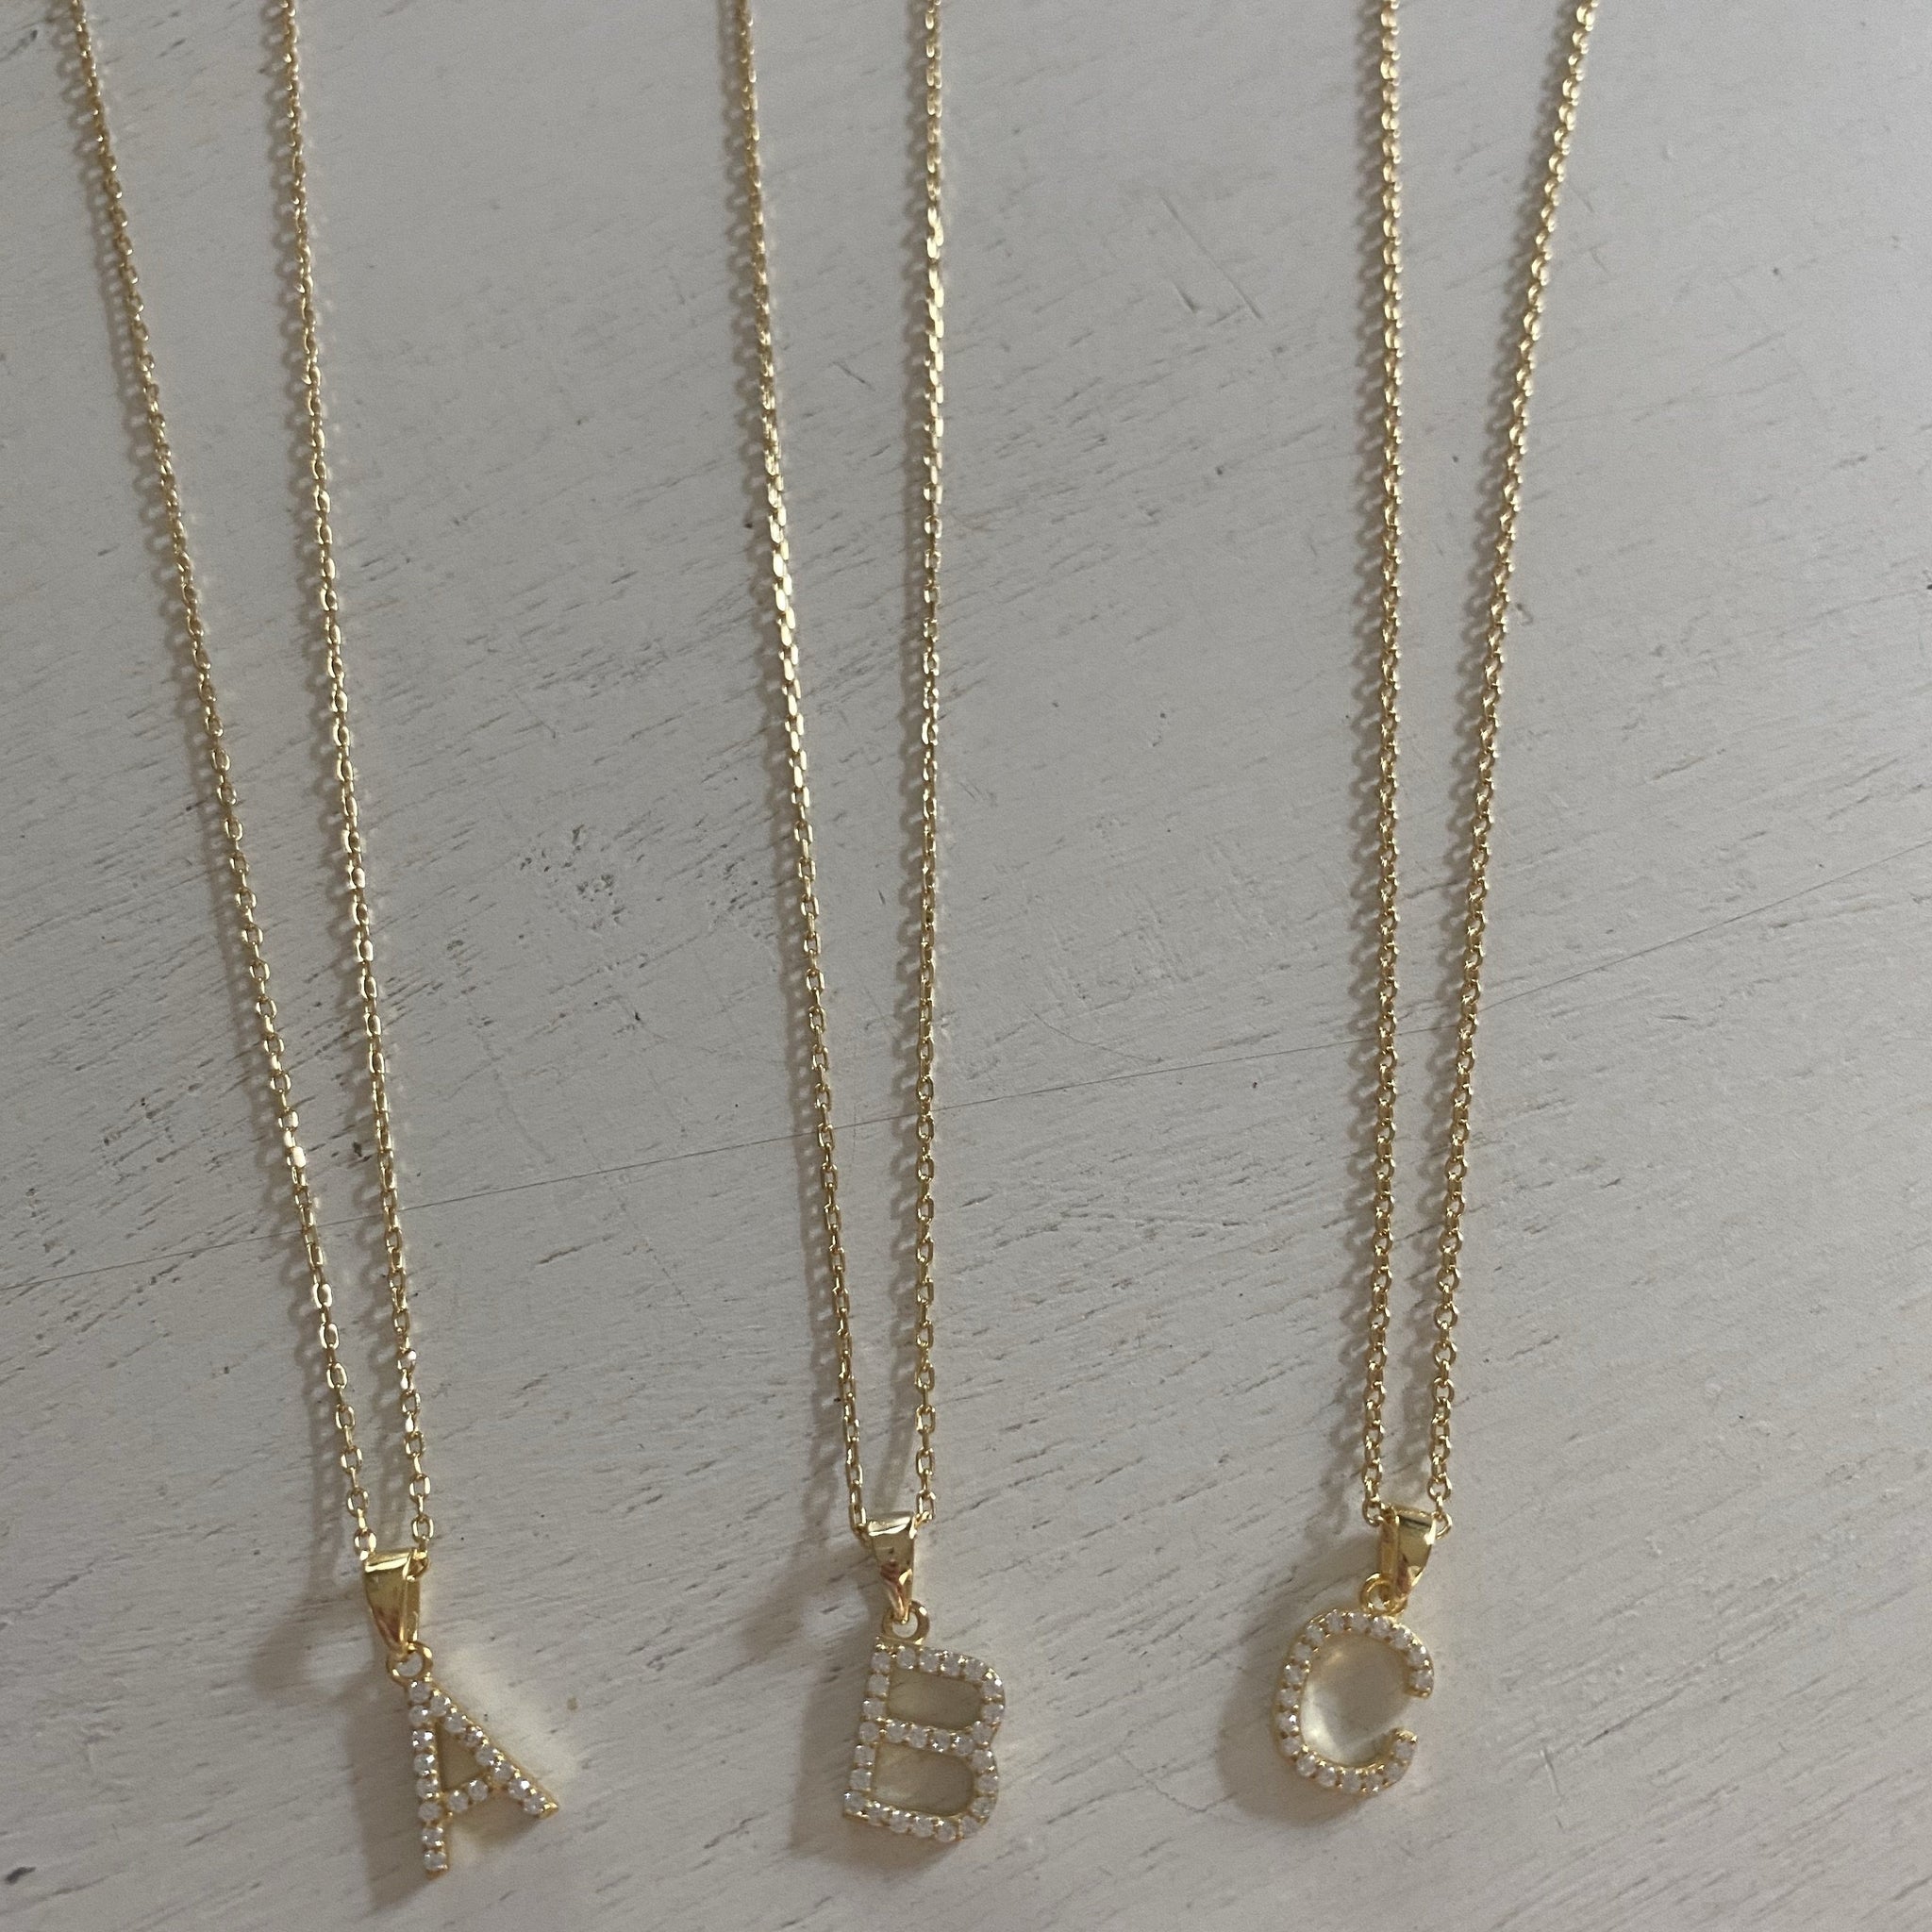 Sparkly Initial Pendent Necklace